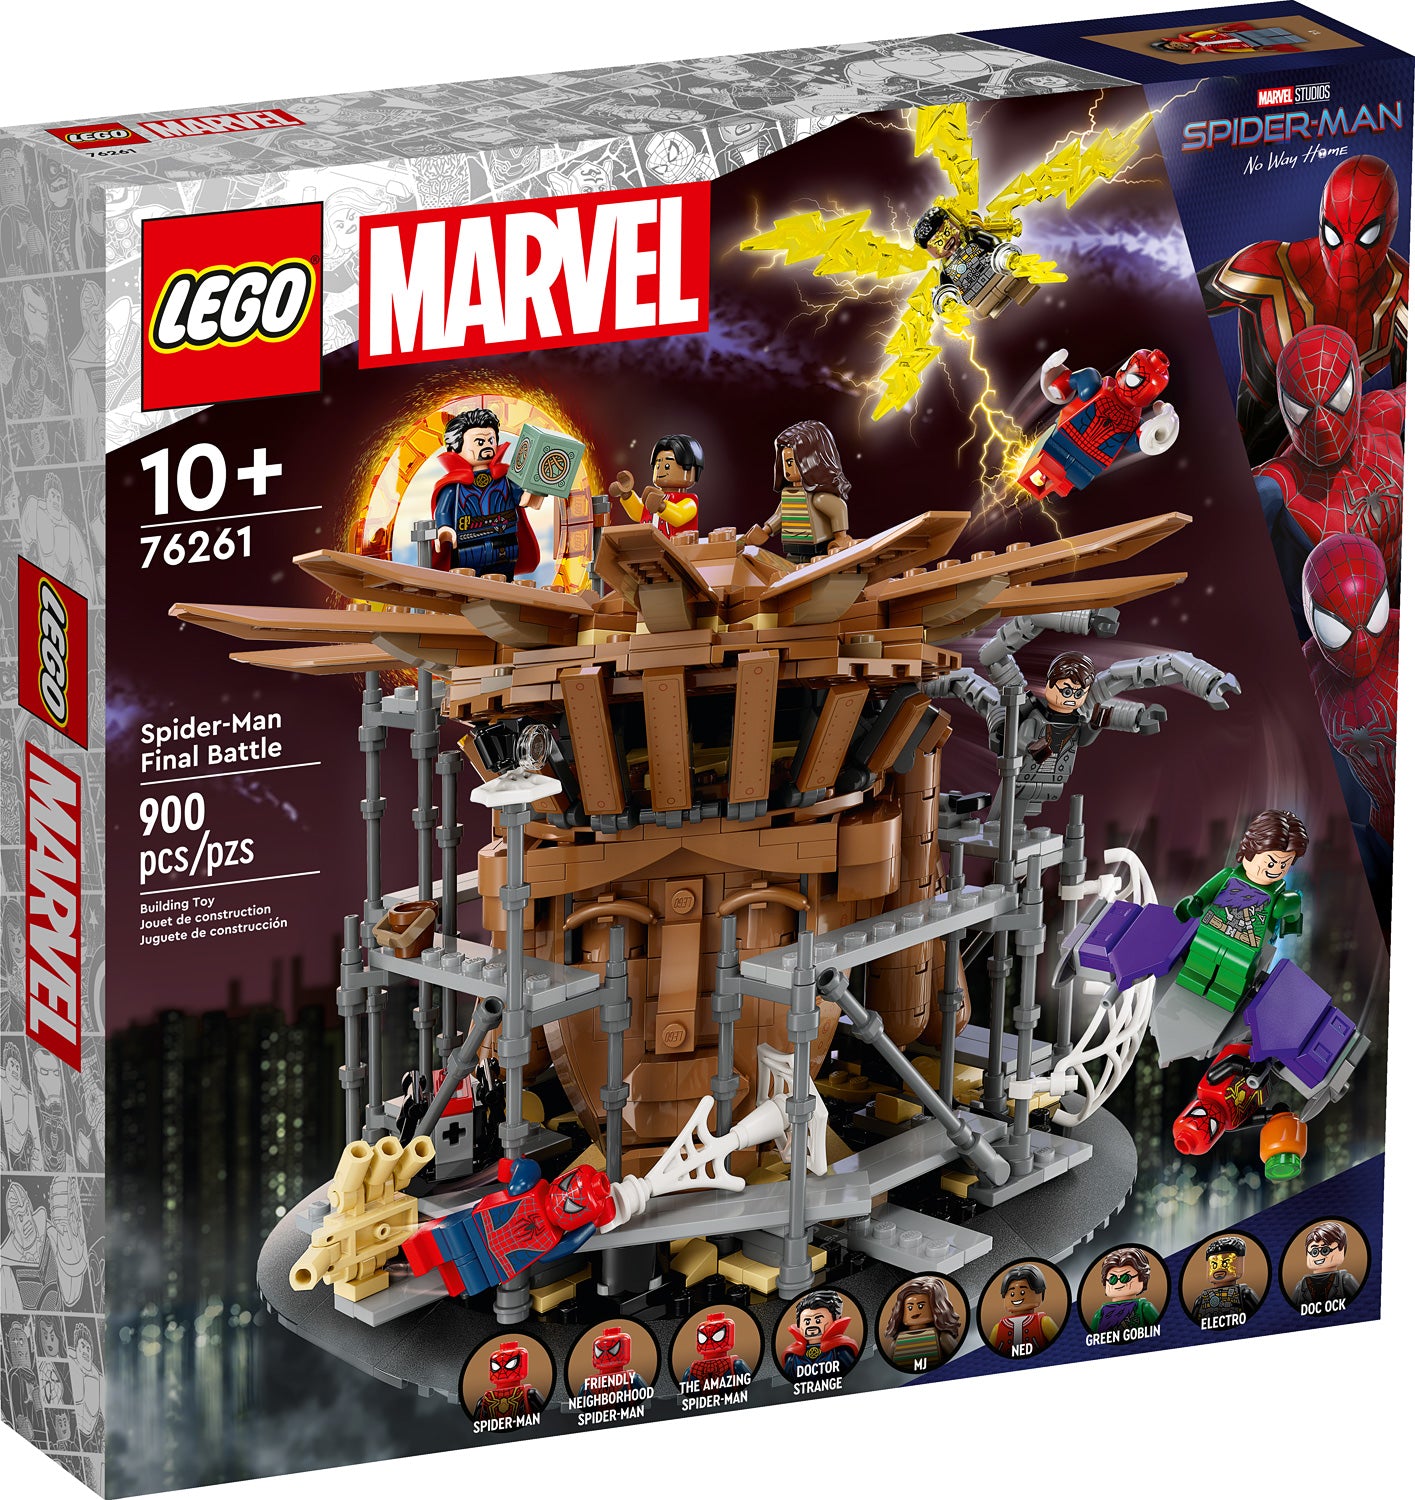 LEGO DUPLO Spider-Man Headquarters REVIEW (Yes, I am Actually Reviewing  DUPLO) 